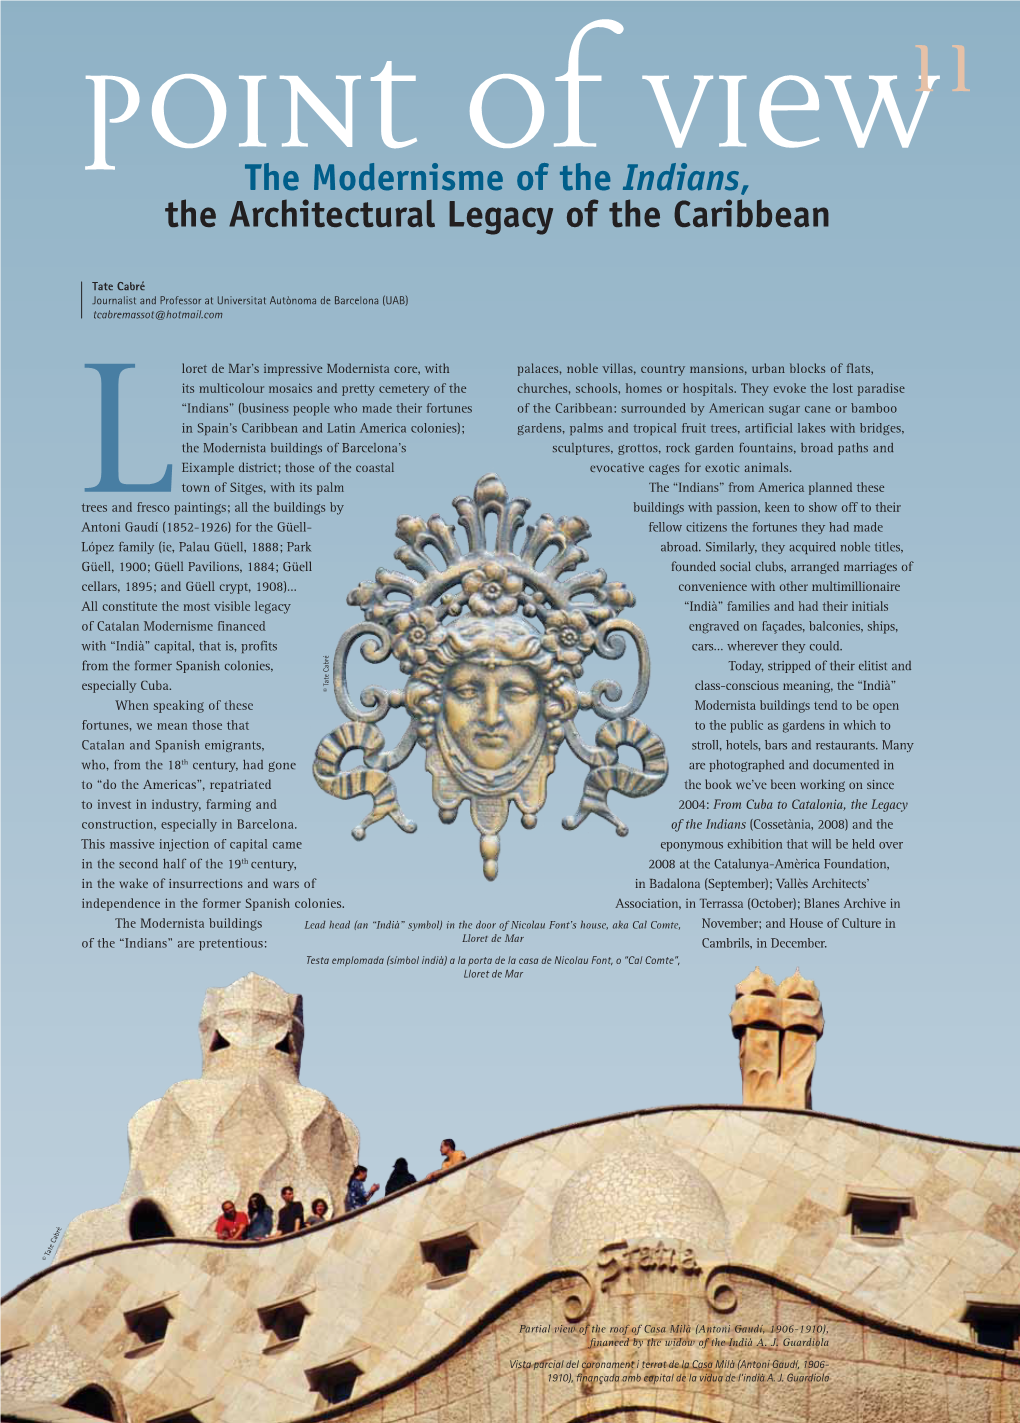 The Modernisme of the Indians, the Architectural Legacy of the Caribbean